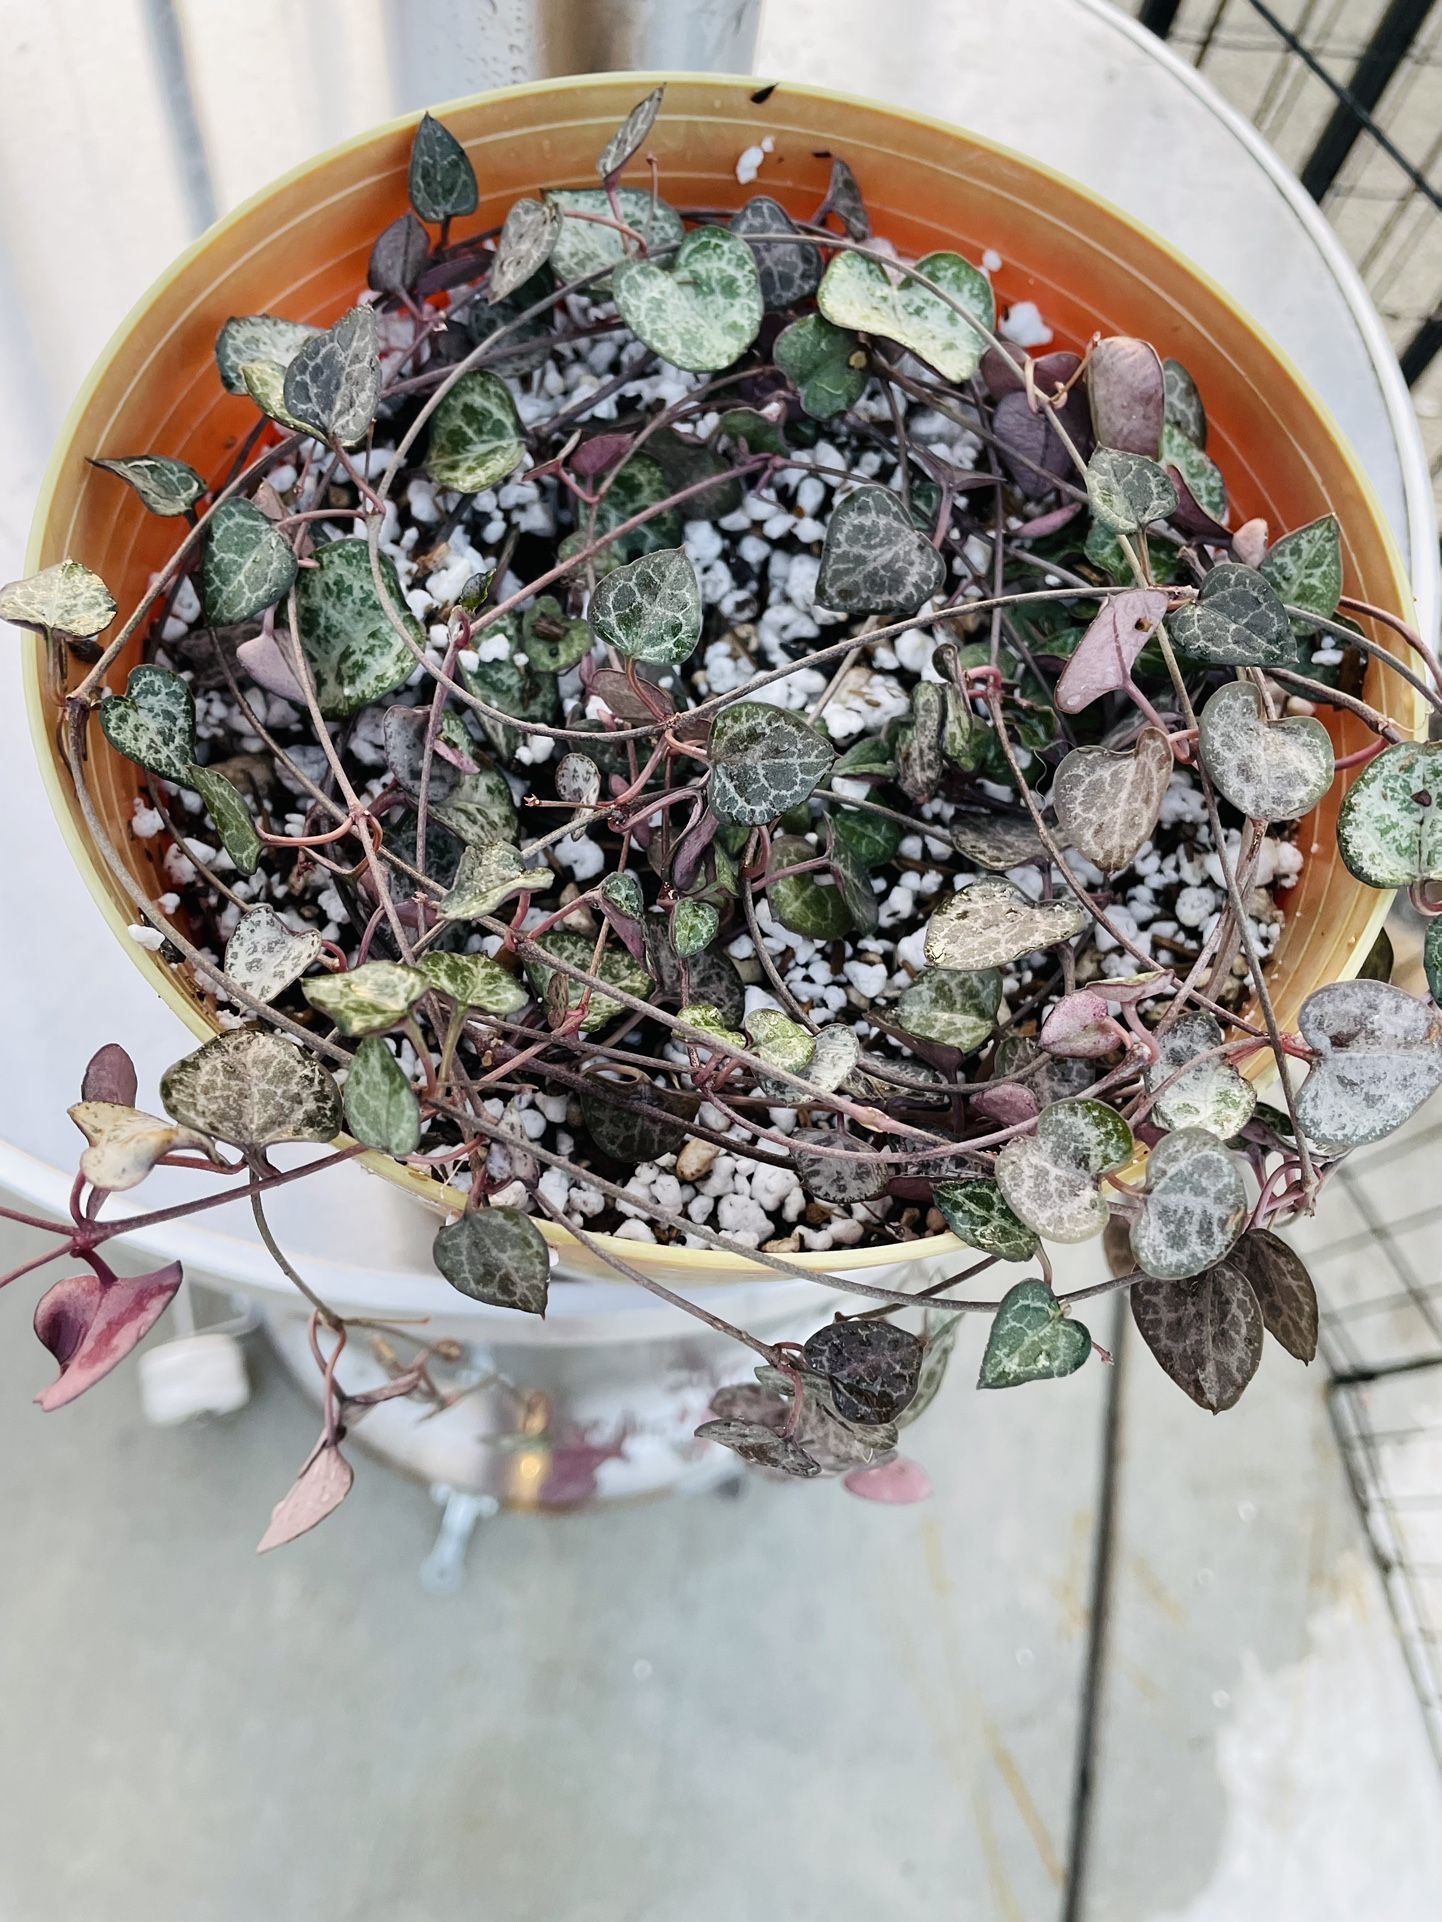 Succulent, String Of Hearts, Ceropegia Woodii